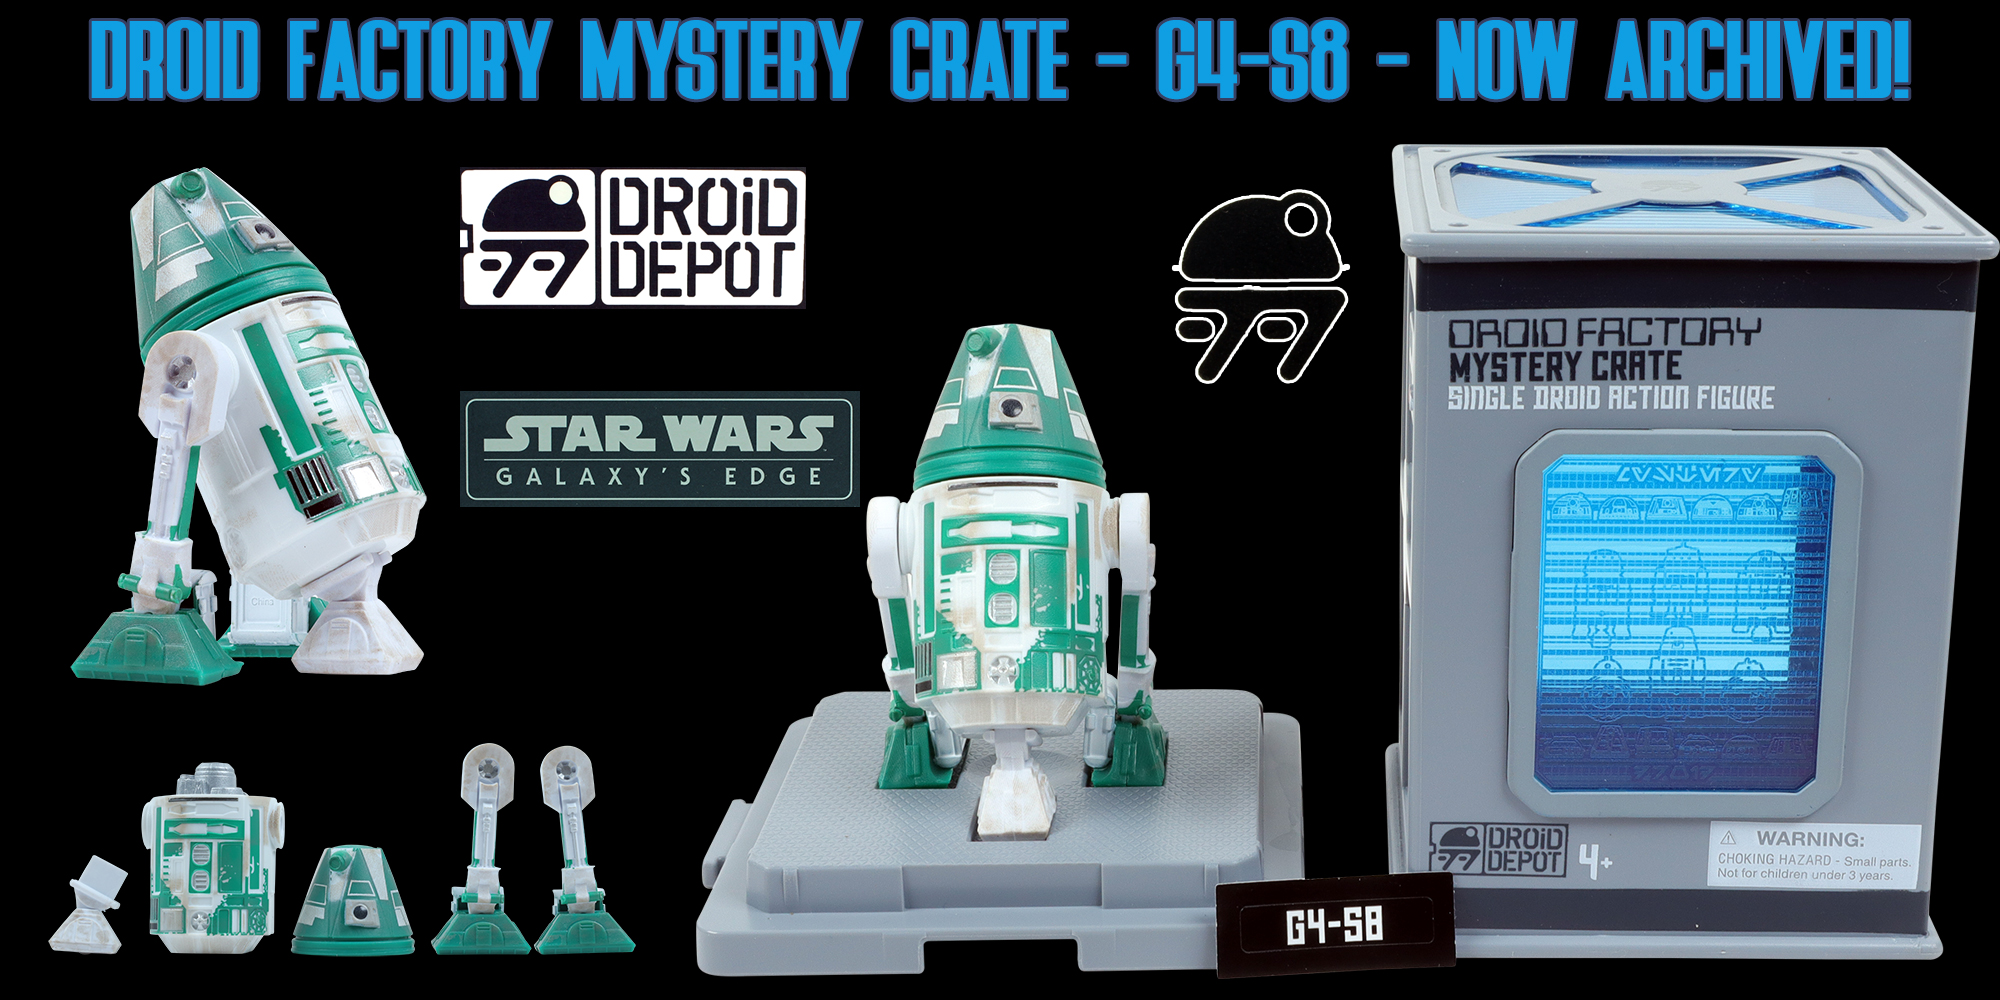 Droid Factory Mystery Crate G4-S8 Archived